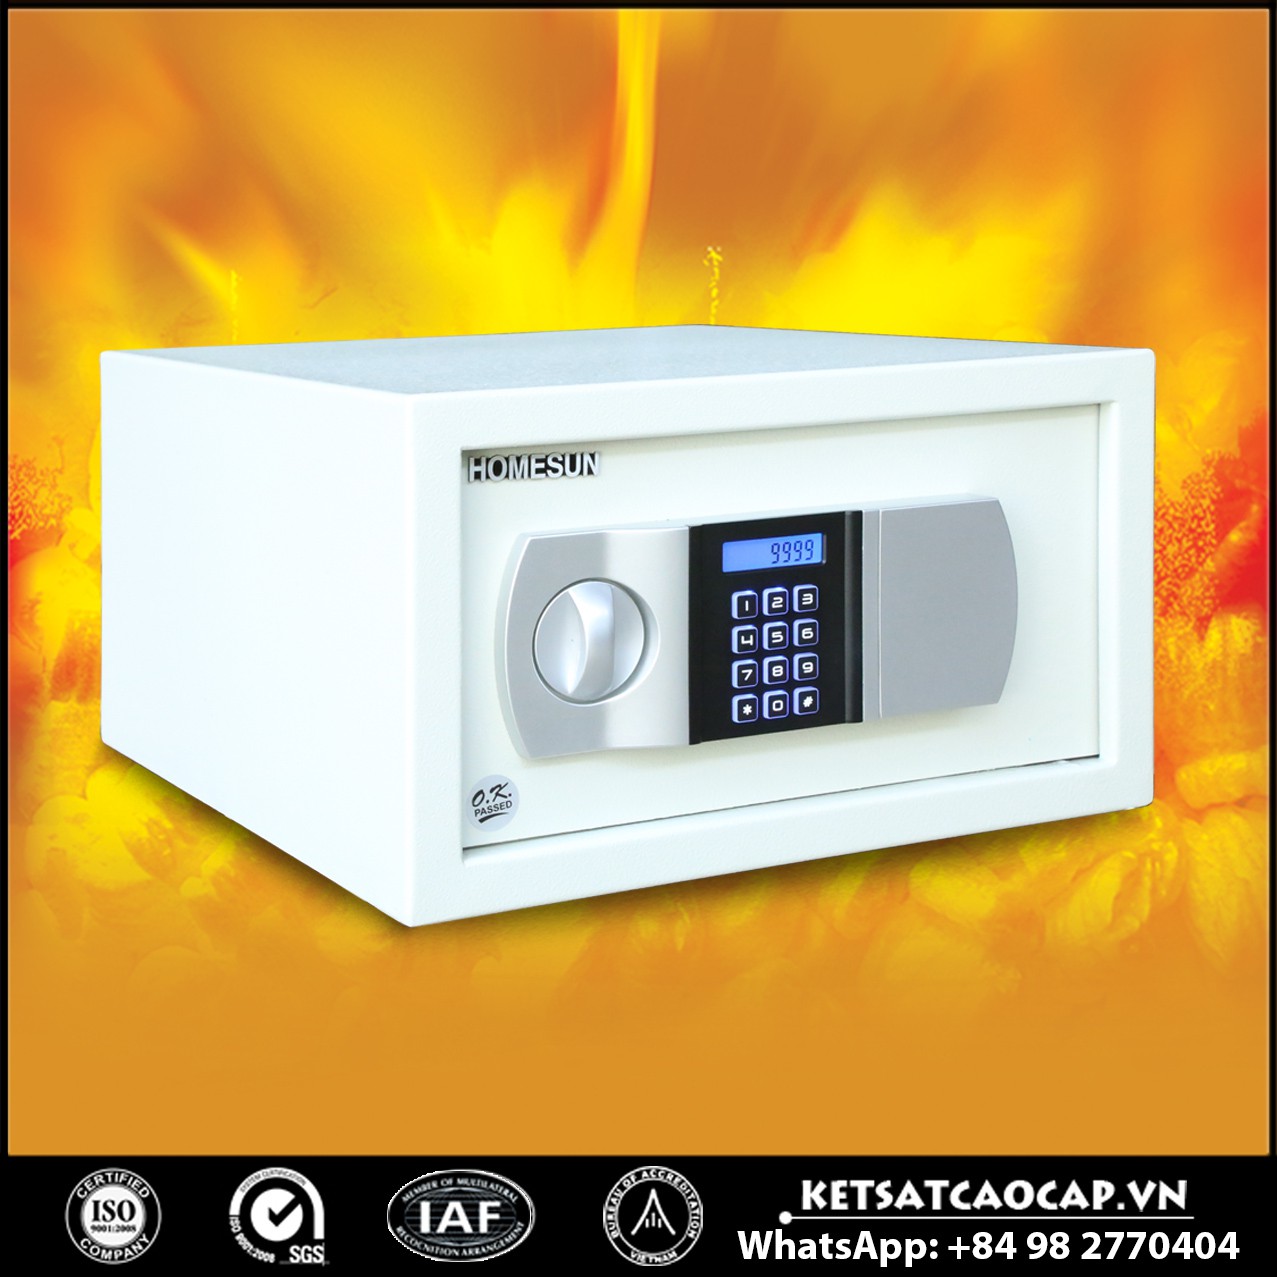 Best Sellers In Hotel Safes Manufacturers